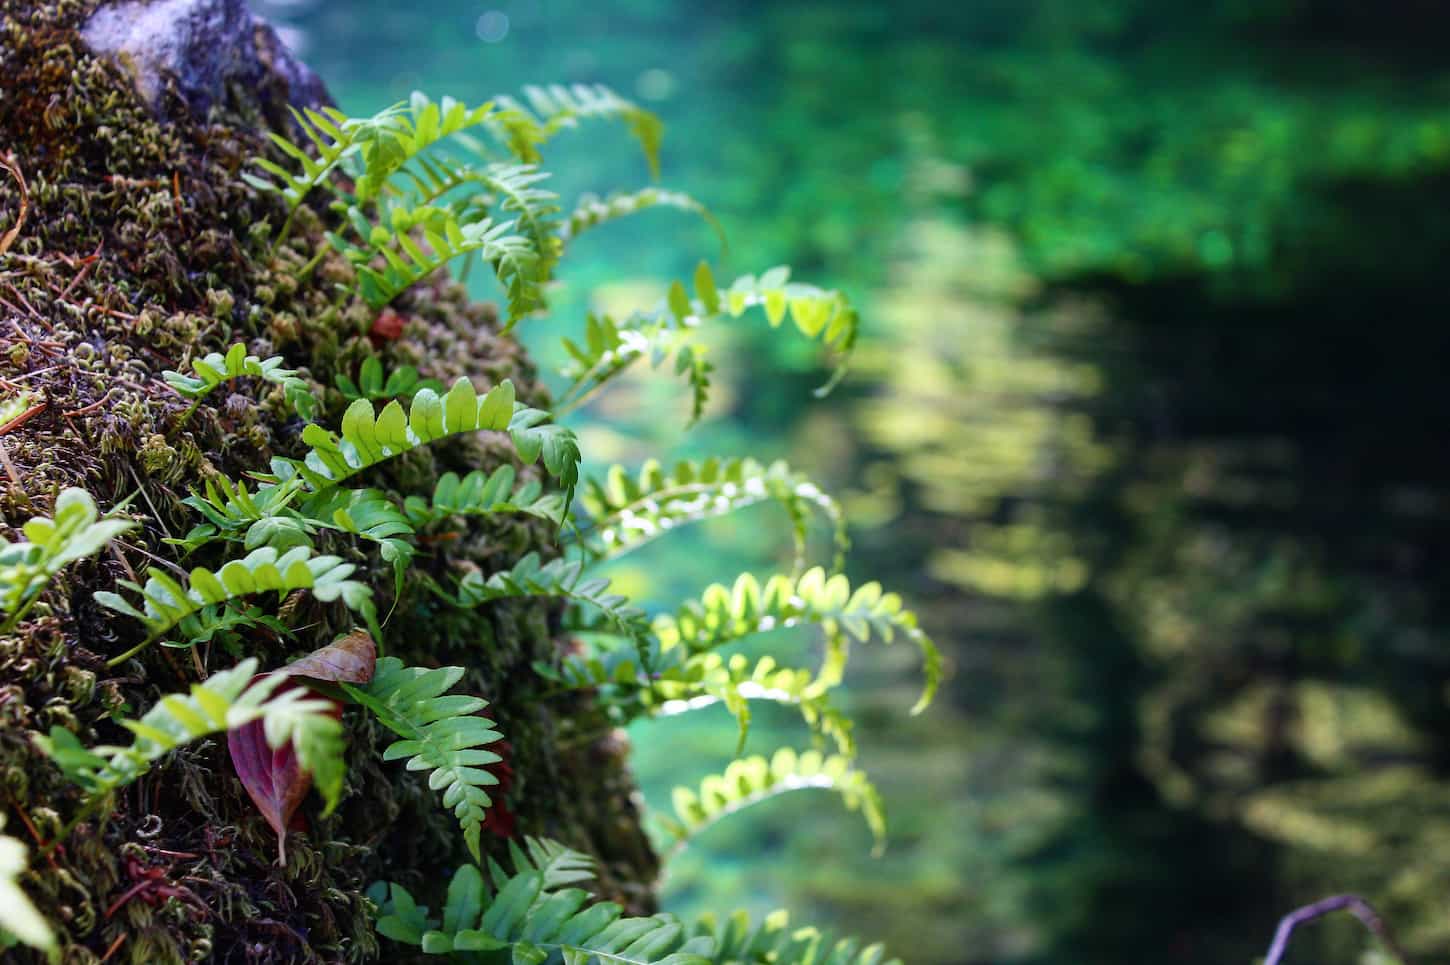 An image of a green fern on green water in a forest background.